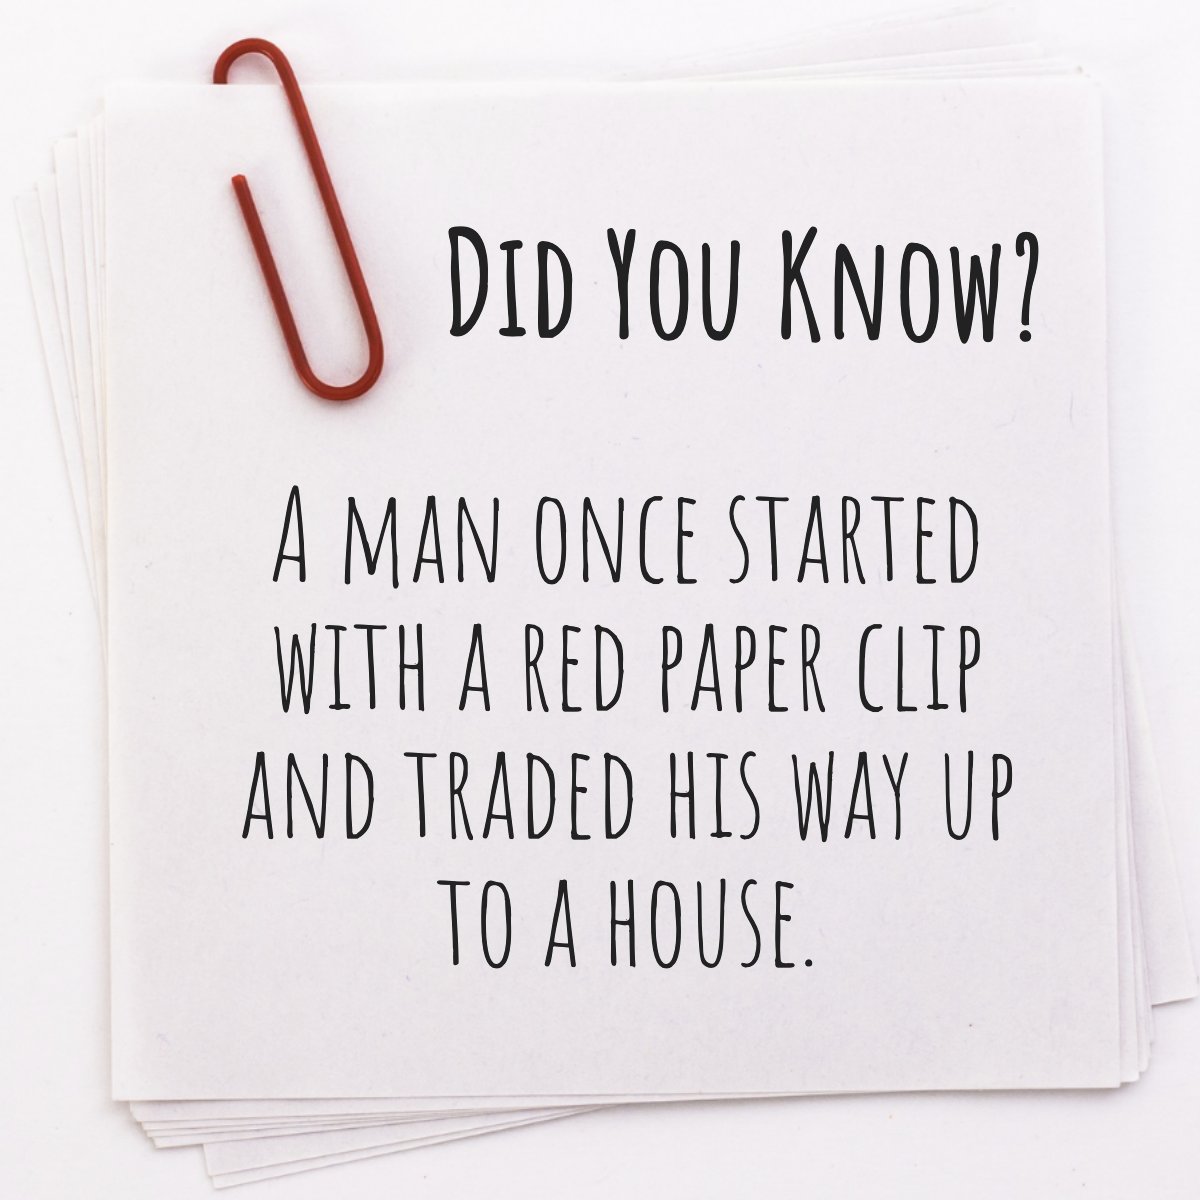 Did you know this? 😱

#didyouknowfacts #thisisforyou #diduknow #youknowwhatitis
 #RealEstateItsWhatWeDo